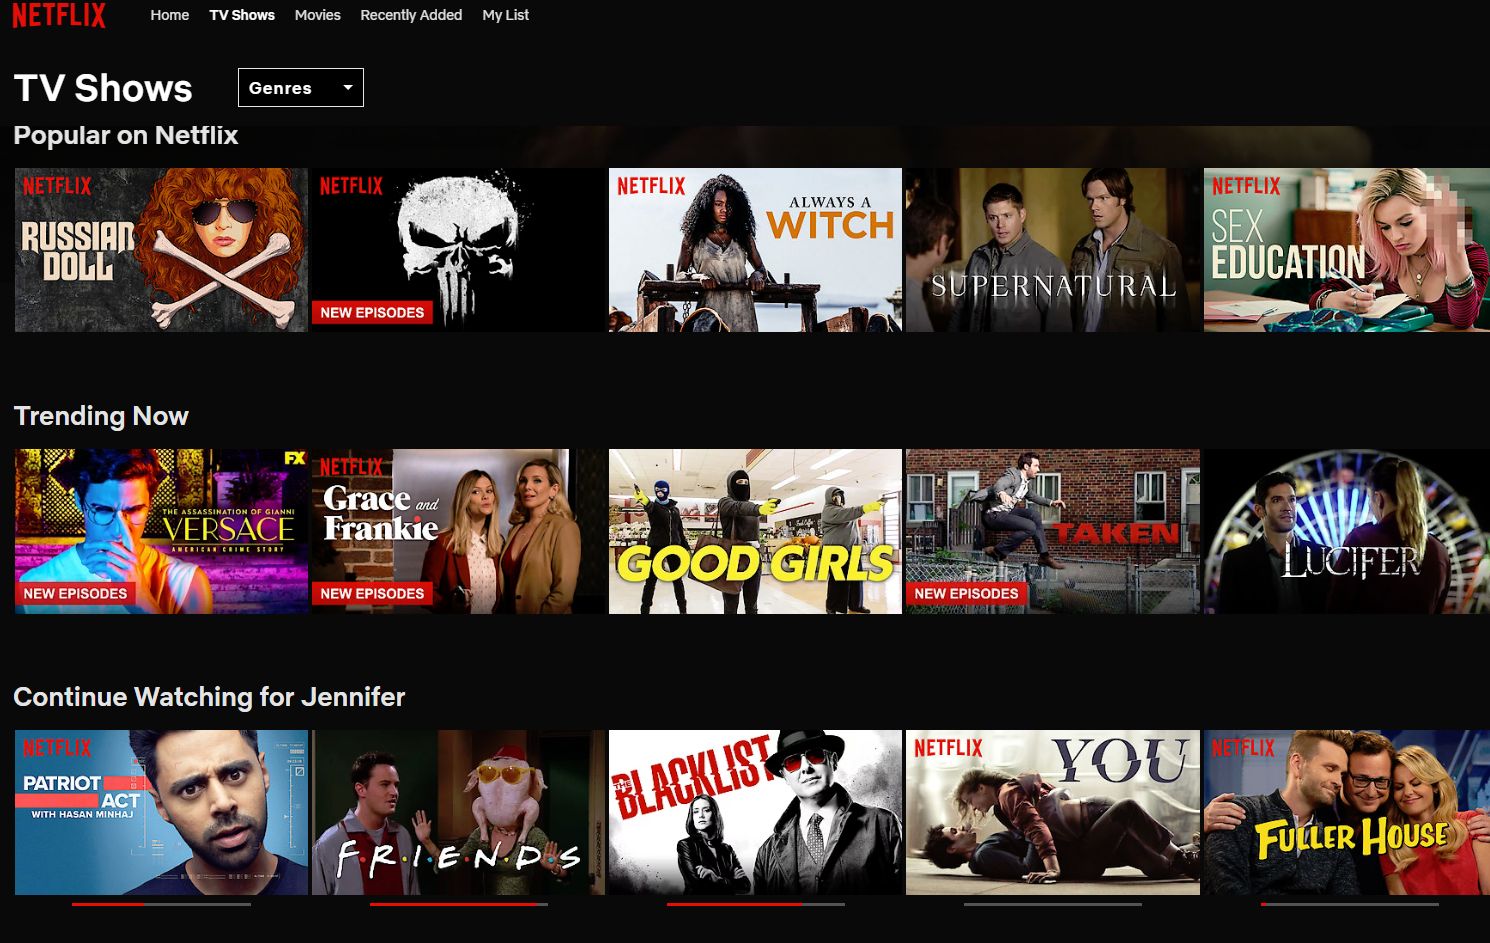 good shows to watch on netflix